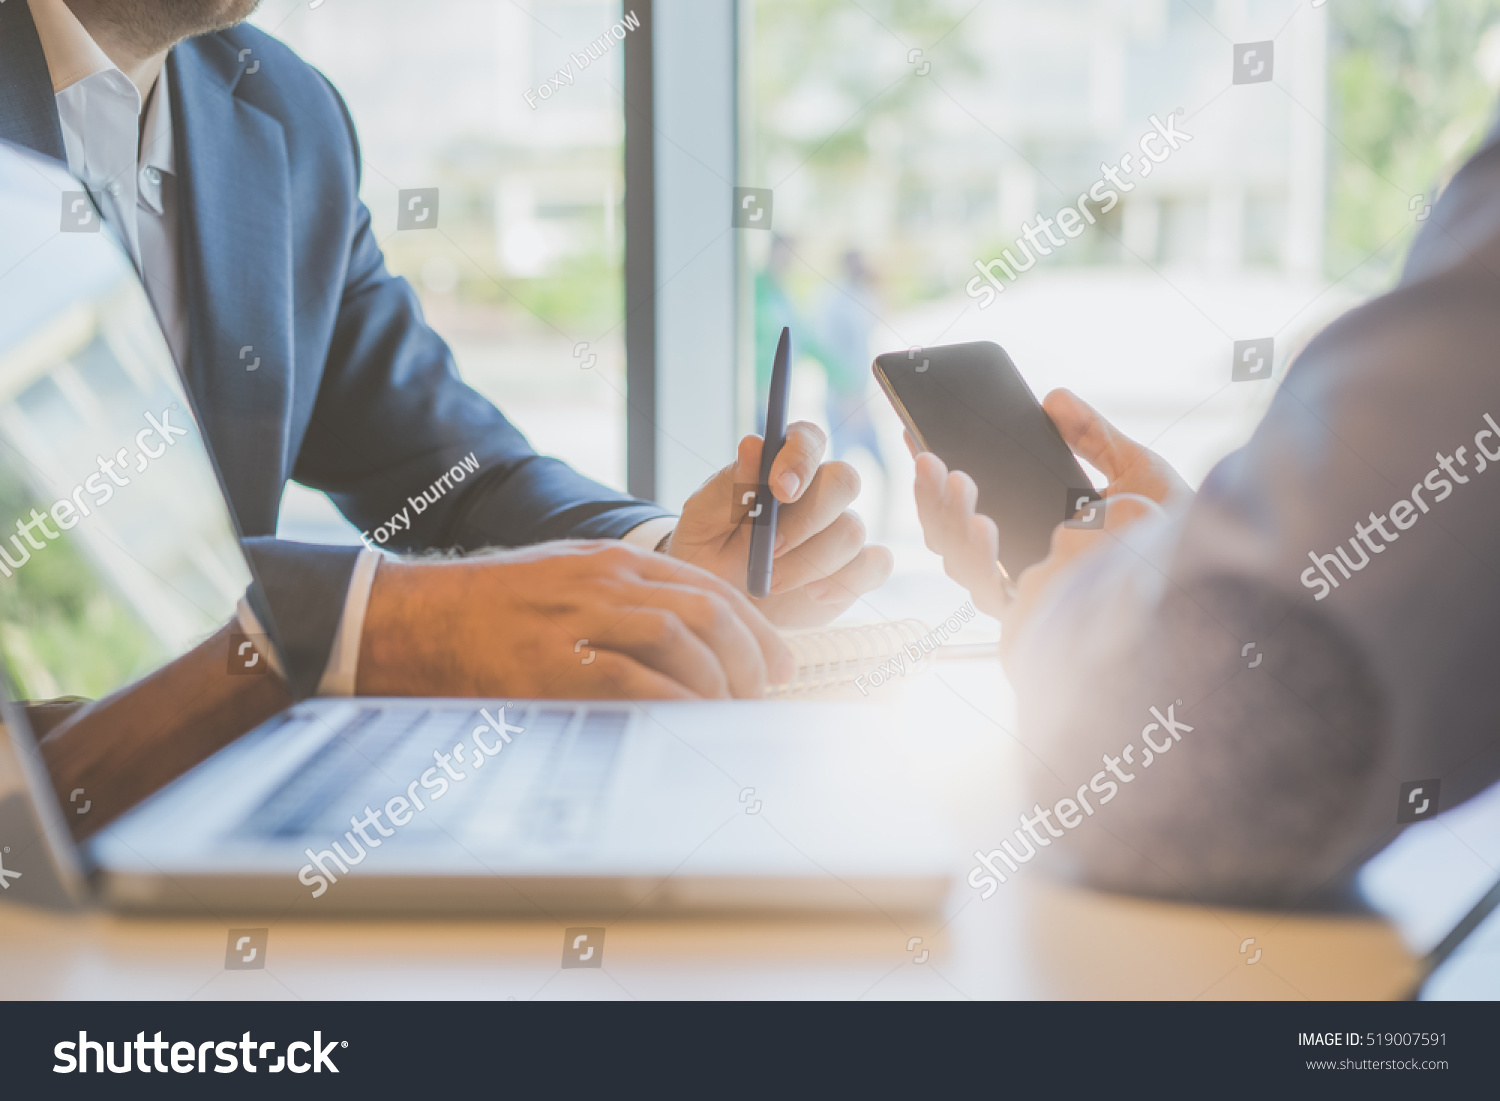 Business meeting, interview. Side view,closeup of man's hands, in hands of one of businessman smartphone, in hands of other businessman pen and notebook, on table is a laptop,film effect #519007591